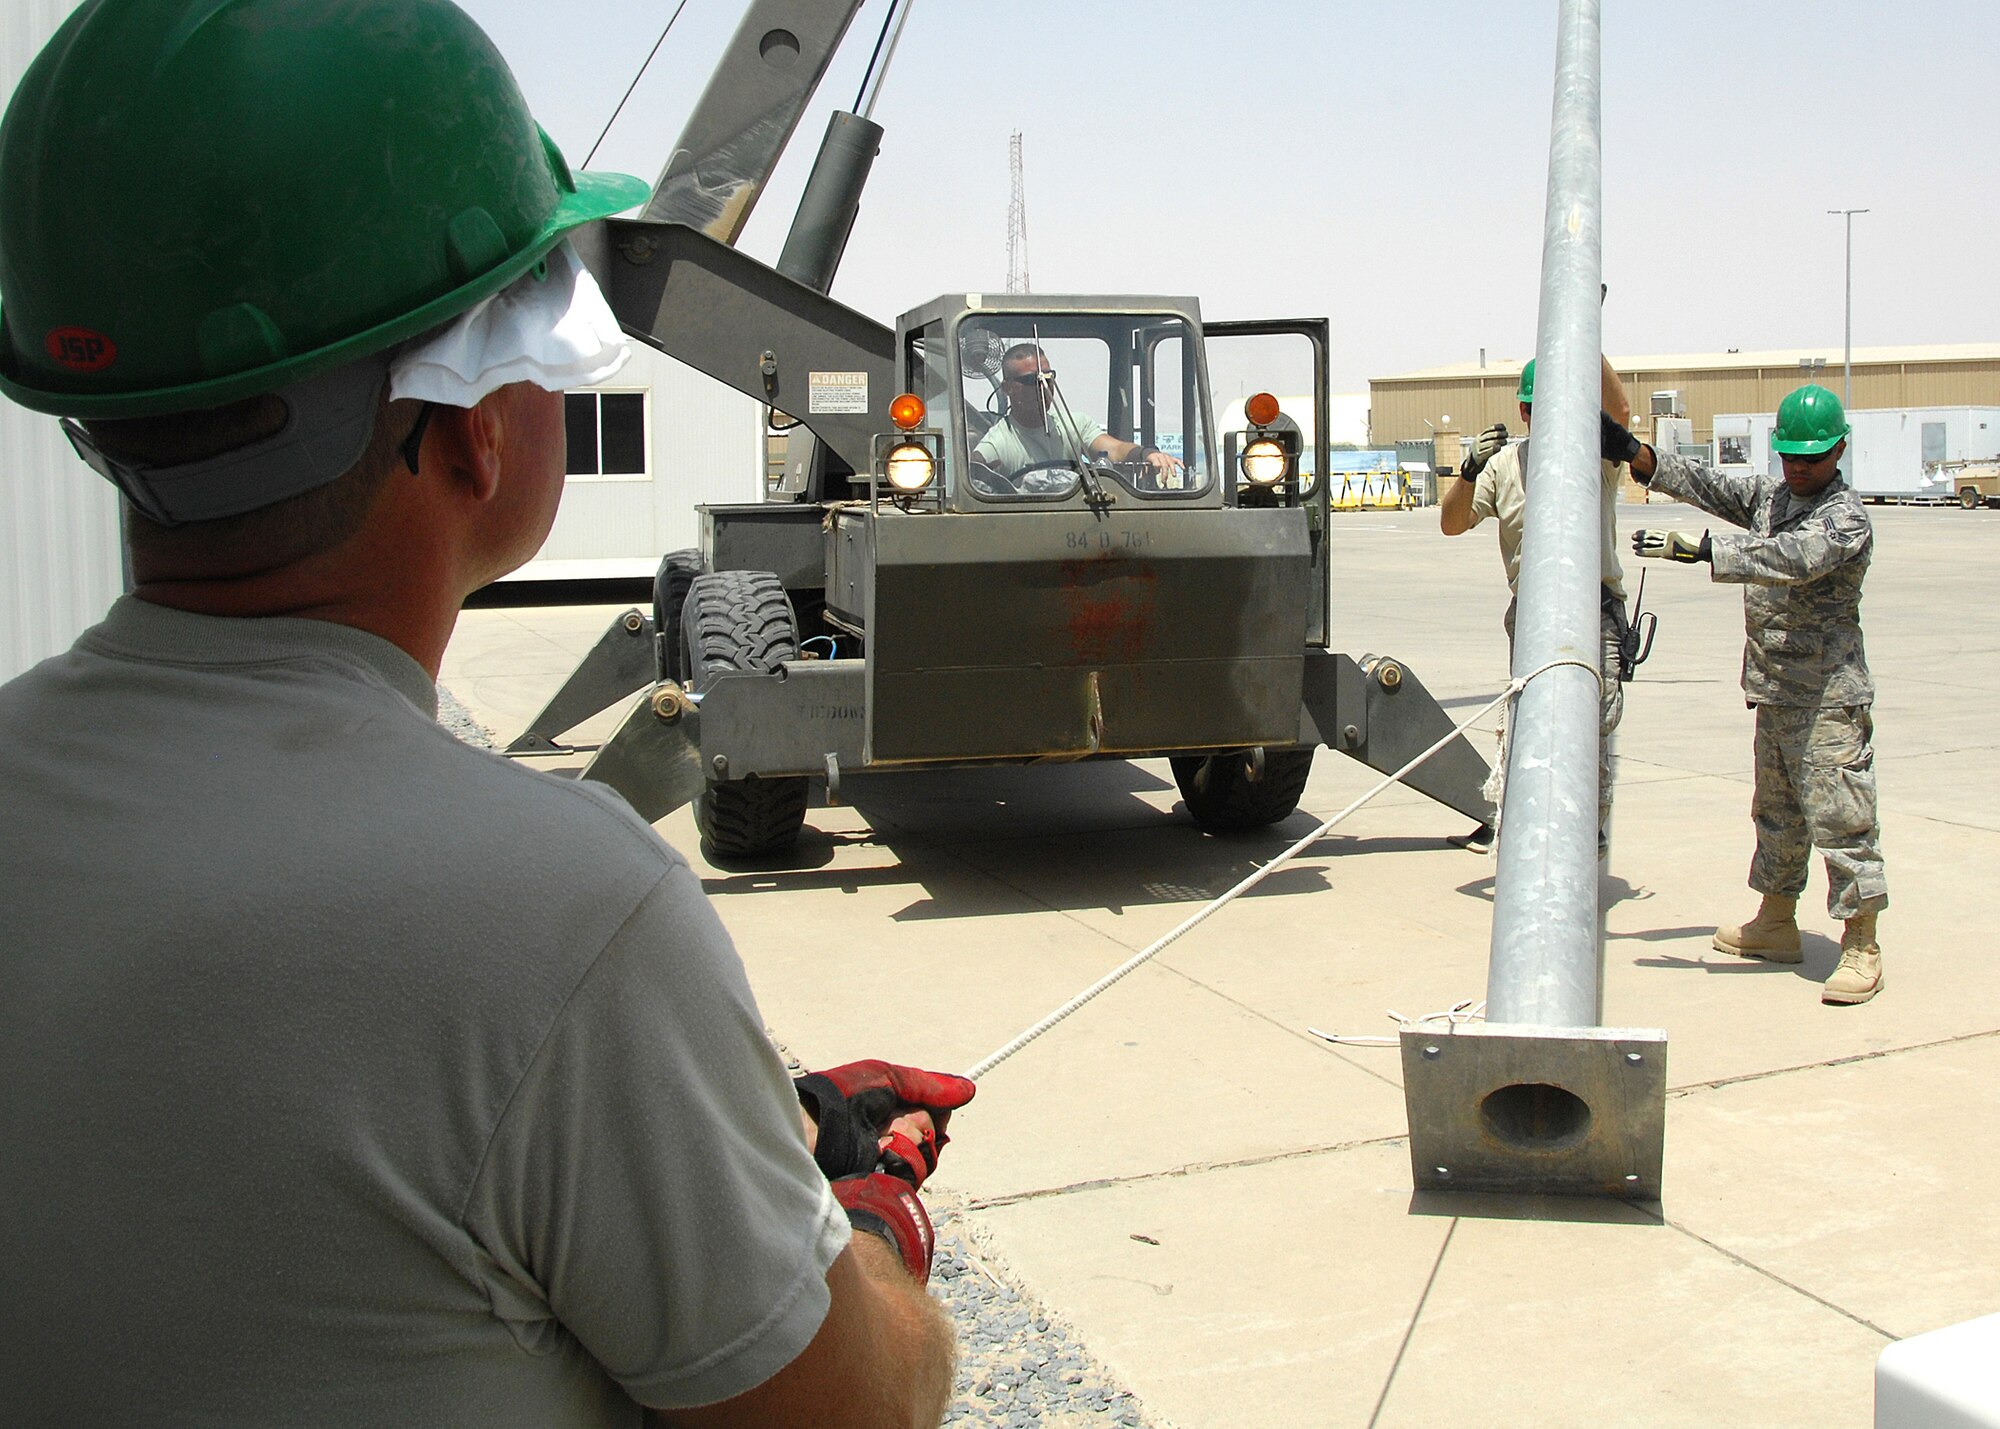 SOUTHWEST ASIA -- Staff Sgt. Ricky Clark steadies a support cable while Master Sgt. Steven Gaskill (left) and Senior Airman Jose Lozadacosme, all assigned to the 386th Expeditionary Civil Engineer Squadron, help stabilize a light pole while it's being secured to its permanent base on Aug. 23 at an air base in Southwest Asia. The 386th ECES installed four new light poles on the Republic of Korea Air Force compound because of previous wind damage to the poles. The installation was a joint effort between U.S. and Korean Airmen. Sergeant Clark is deployed from the New Jersey Air National Guard, and Sergeant Gaskill is deployed from the New Jersey Air National Guard. Airman Lozadacosme is deployed from the Air National Guard in Puerto Rico. (U.S. Air Force photo/Tech. Sgt. Raheem Moore)